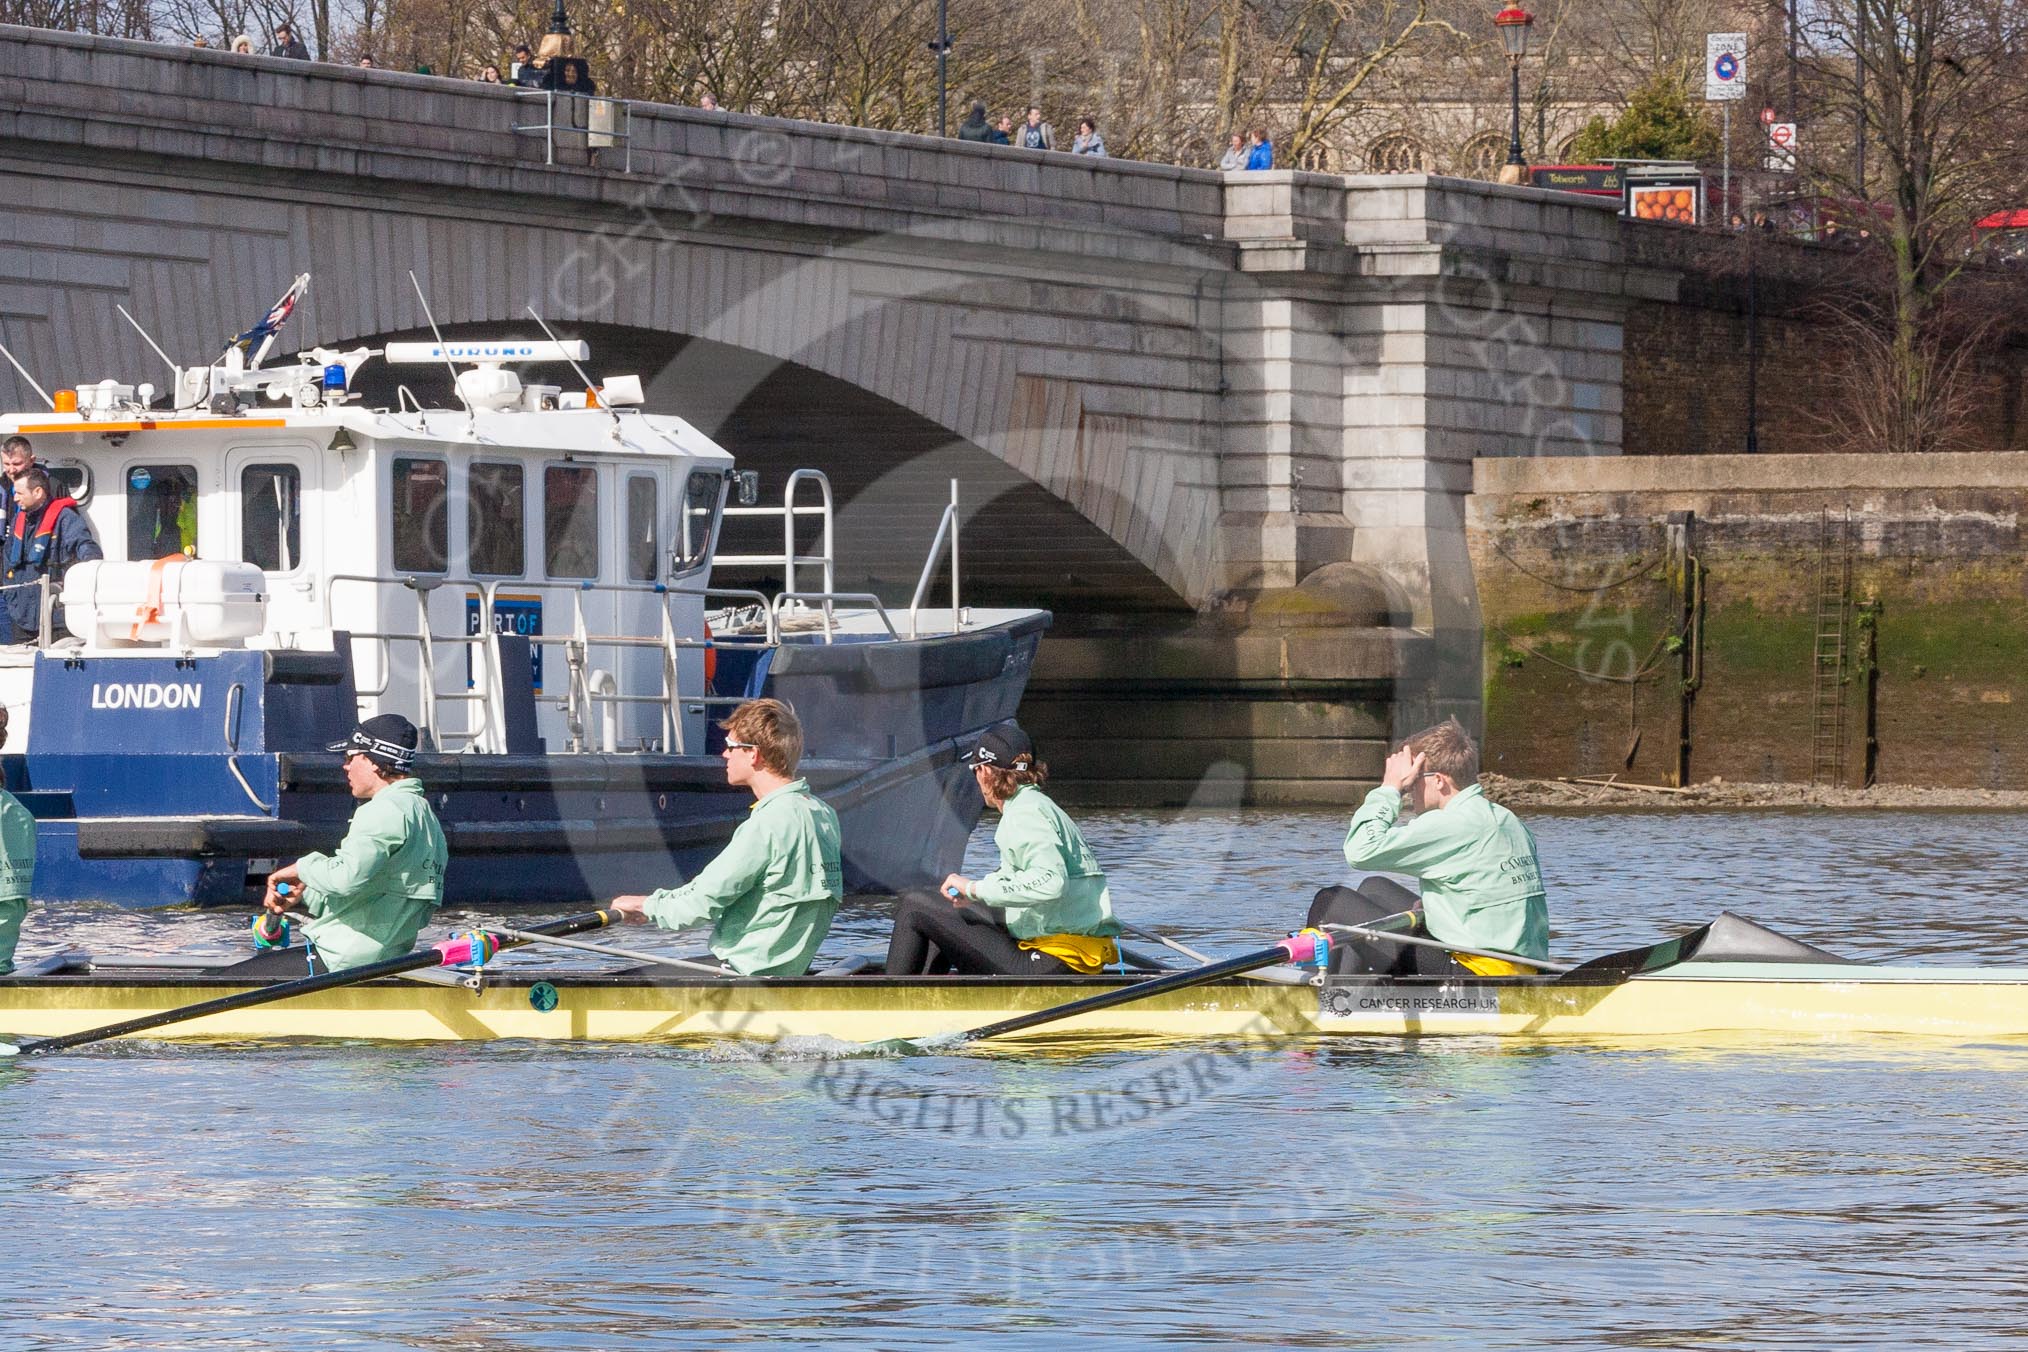 The Boat Race season 2016 -  The Cancer Research Women's Boat Race.
River Thames between Putney Bridge and Mortlake,
London SW15,

United Kingdom,
on 27 March 2016 at 14:01, image #139